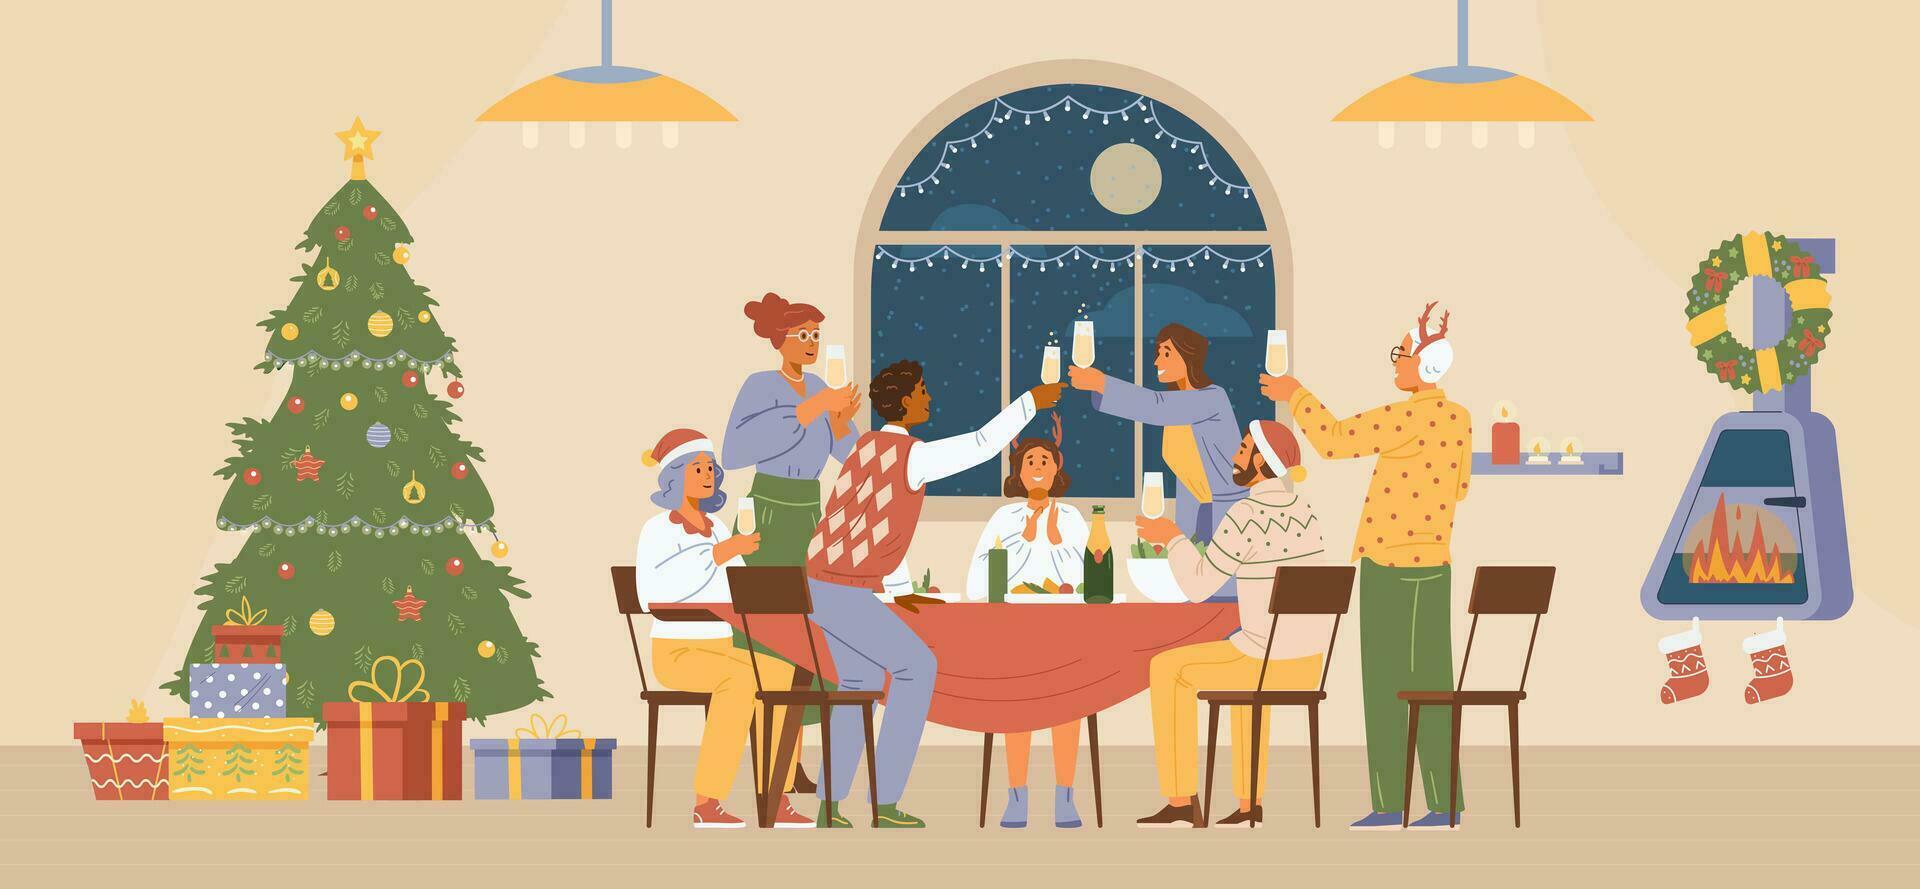 Christmas party at home flat vector illustration. Friends at dinner table with glasses of champagne laughing in cozy living room with Christmas decorations.